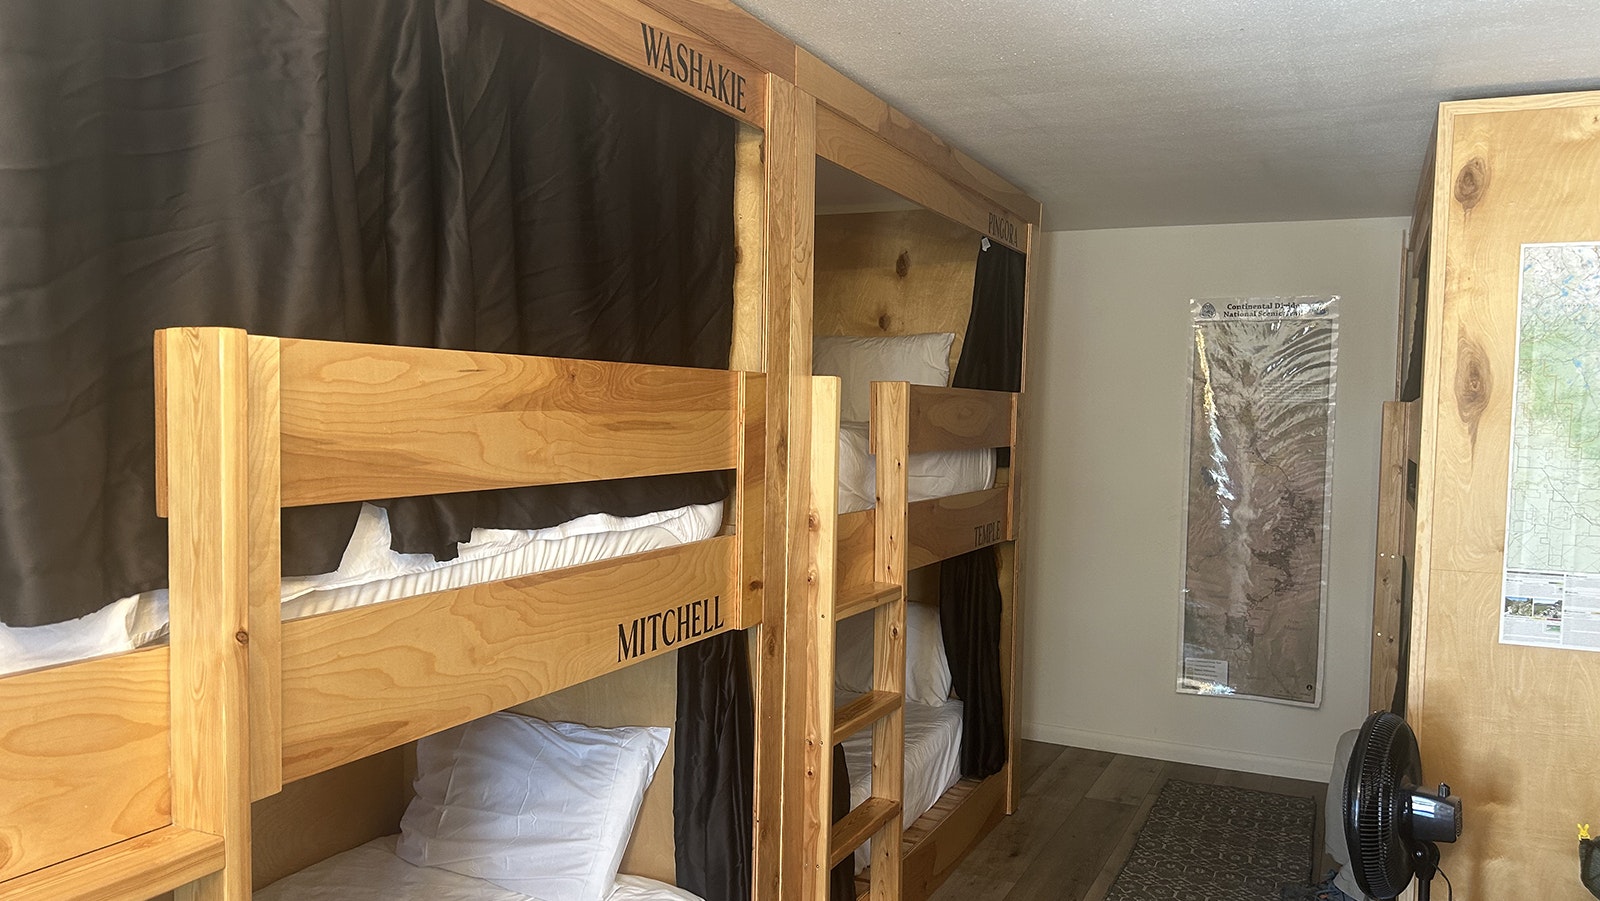 Two rooms at the Jackalope Motor Inn are set up hostel style for hikers with six bunks each.